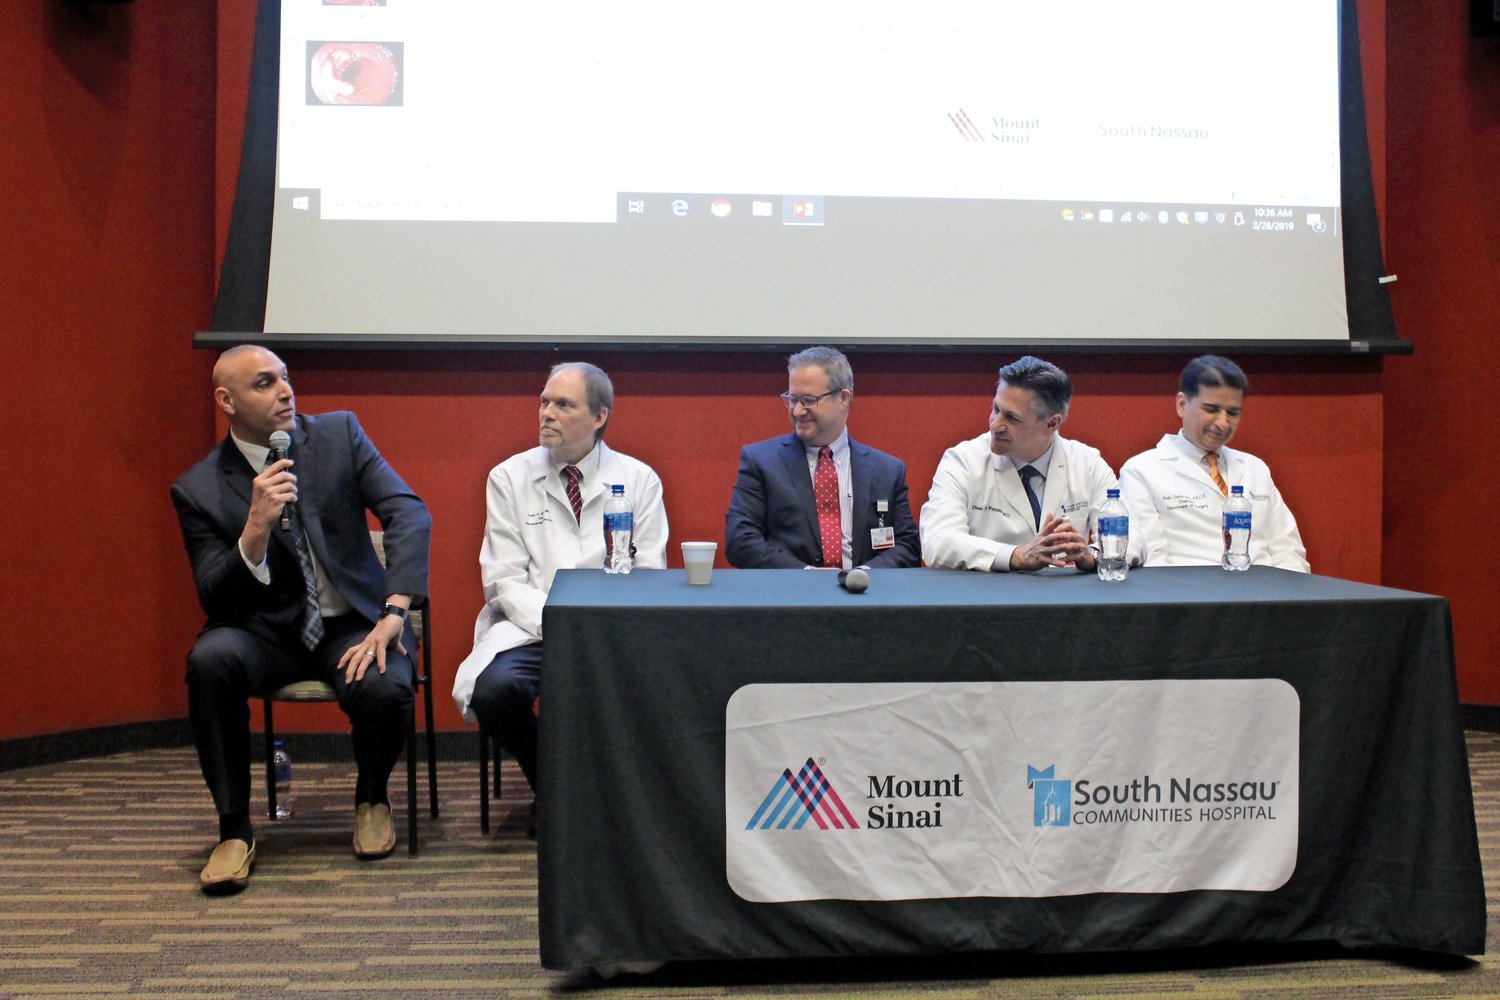 Merrick resident Eric Schrader, left, spoke about his experiences battling colon cancer. He was joined by Dr. Frank Gress, second from left, Dr. Frank Caliendo, Dr. Dean Pappas and Dr. Rajiv Datta, all of South Nassau Communities Hospital.